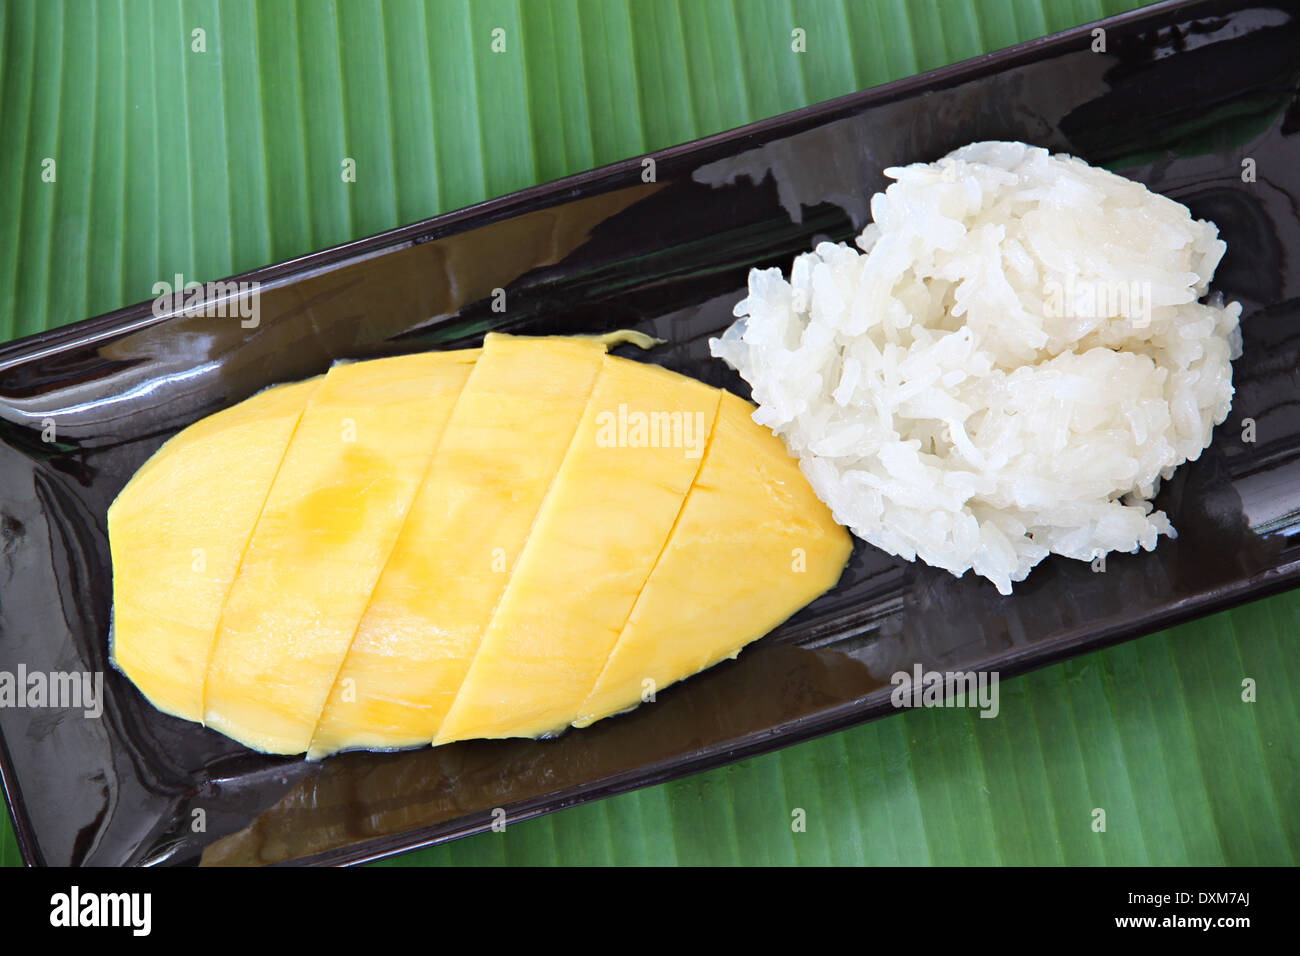 Ripe mango and sticky rice in dish on banana leaves,local Thai foods. Stock Photo